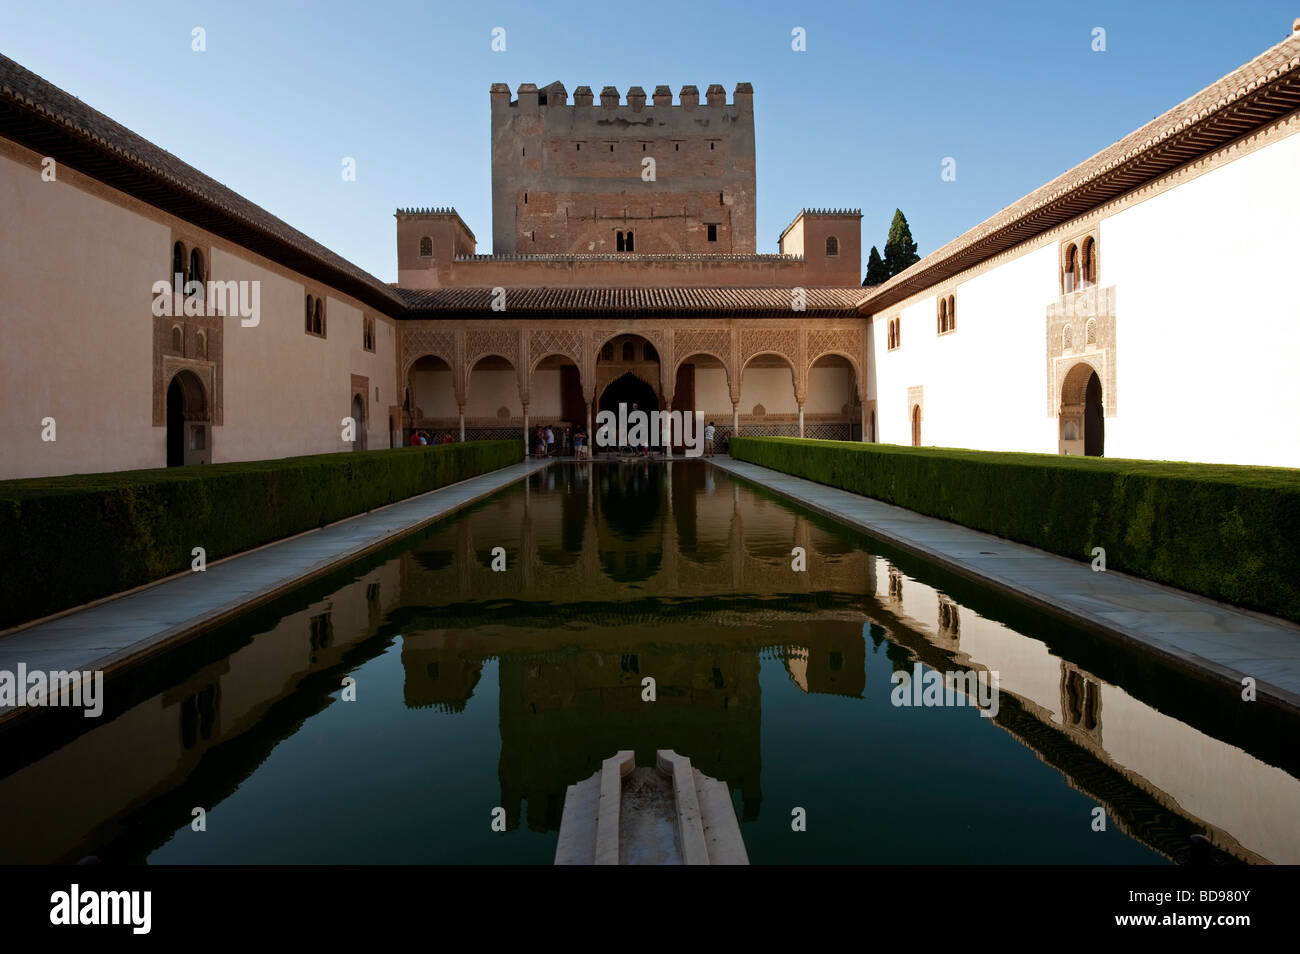 Court of the Myrtles with Comares tower at the back at Alhambra Palace in Granada, Spain Stock Photo